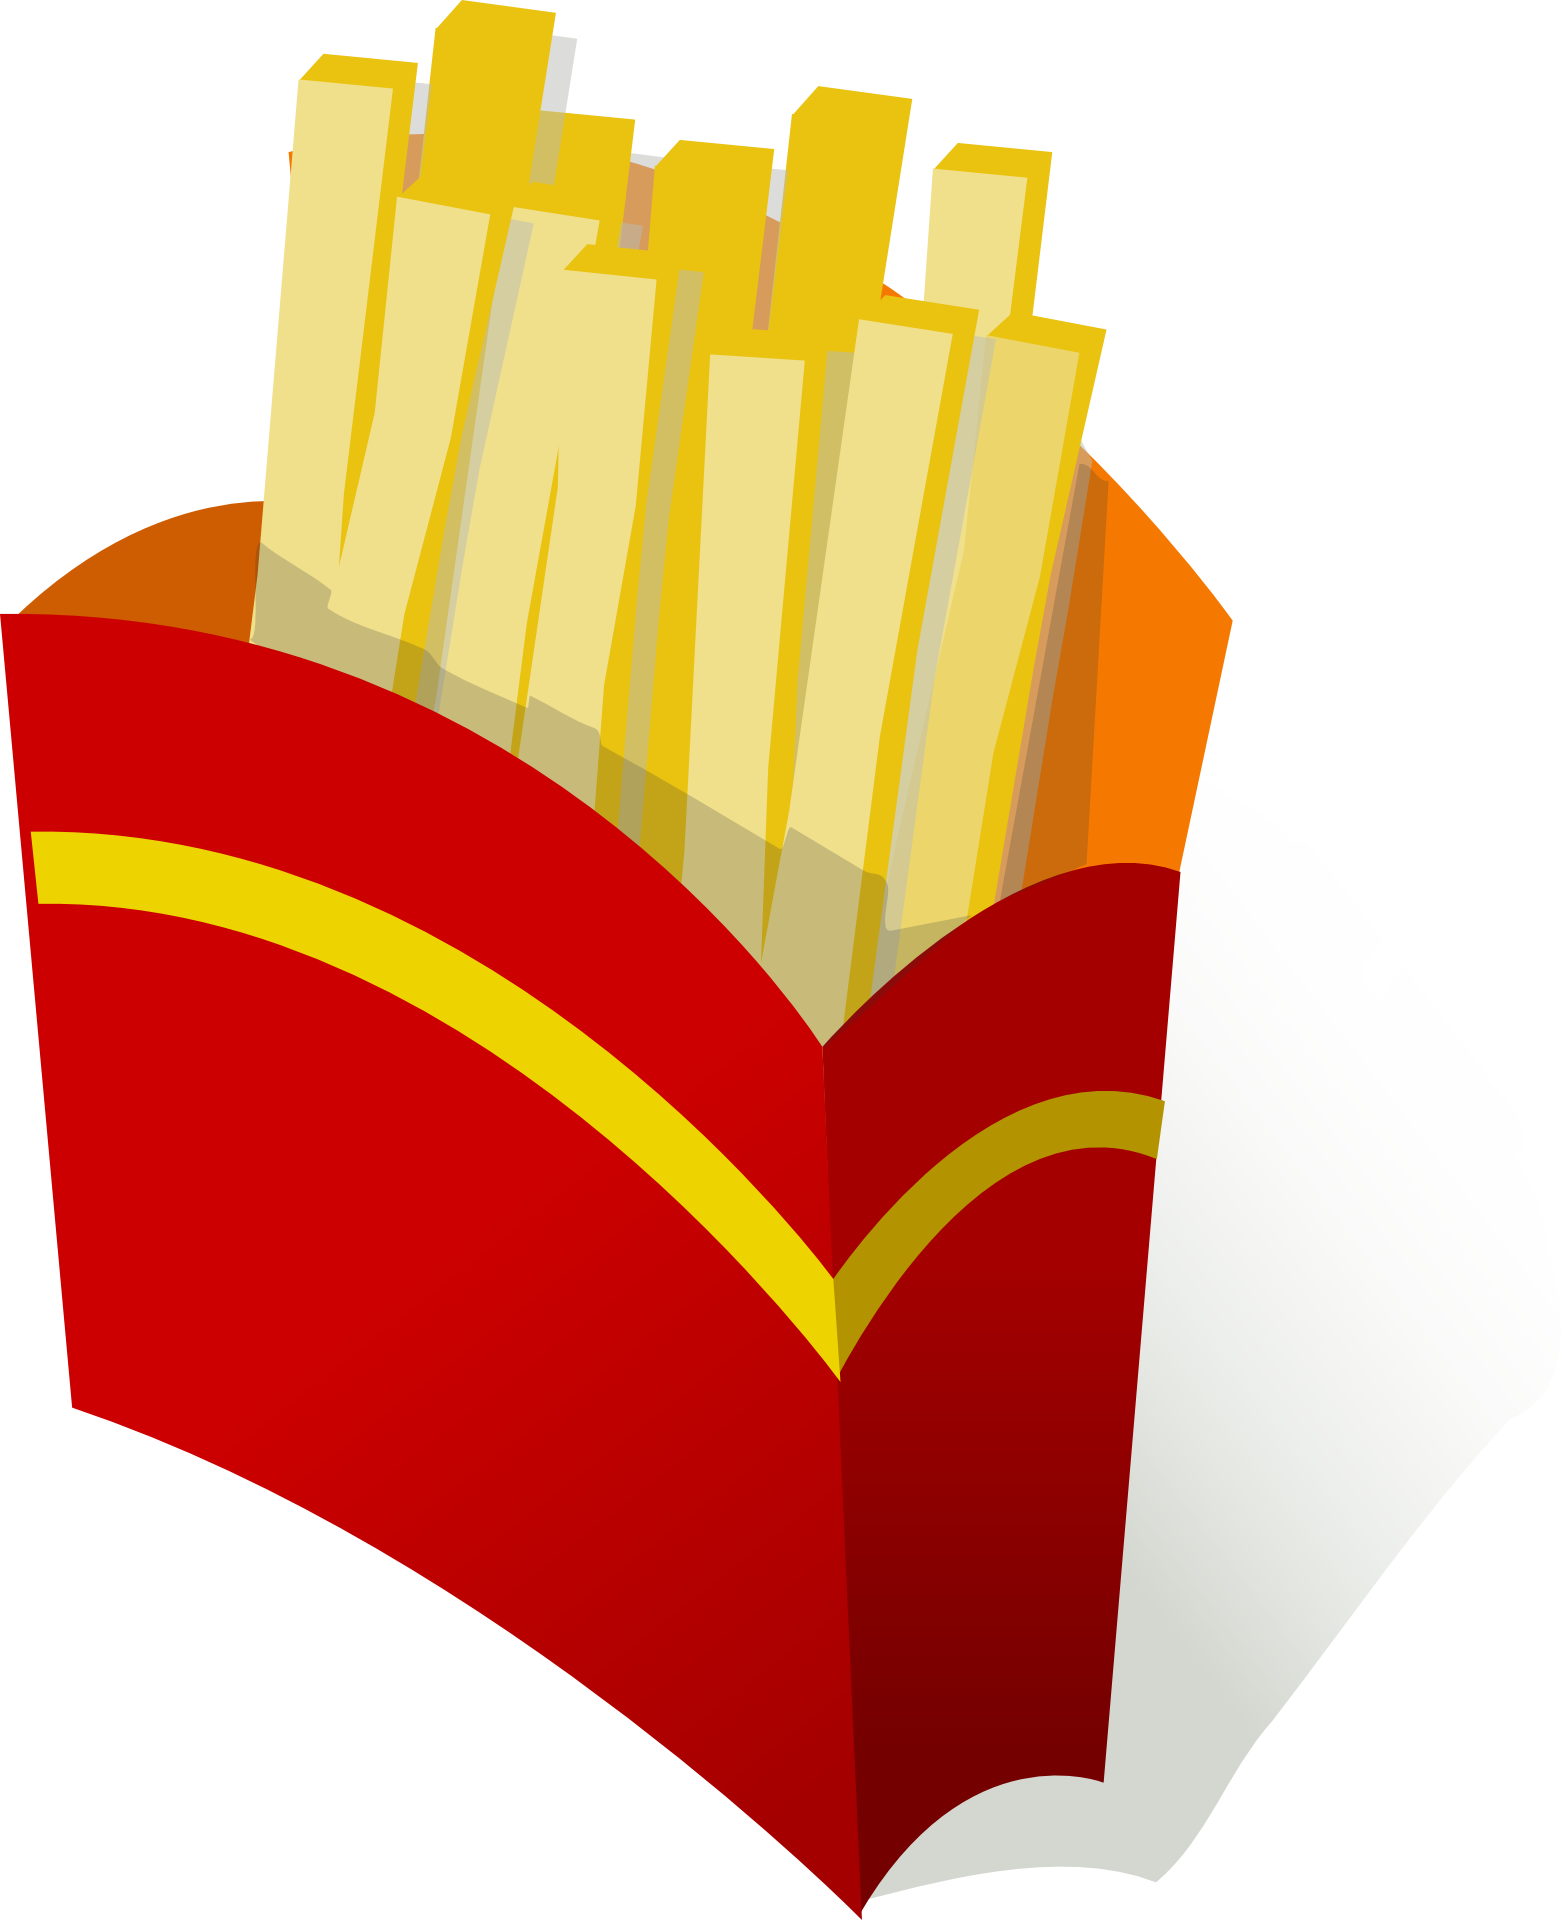 Fastfood french fries drawing. Mcdonalds clipart vector